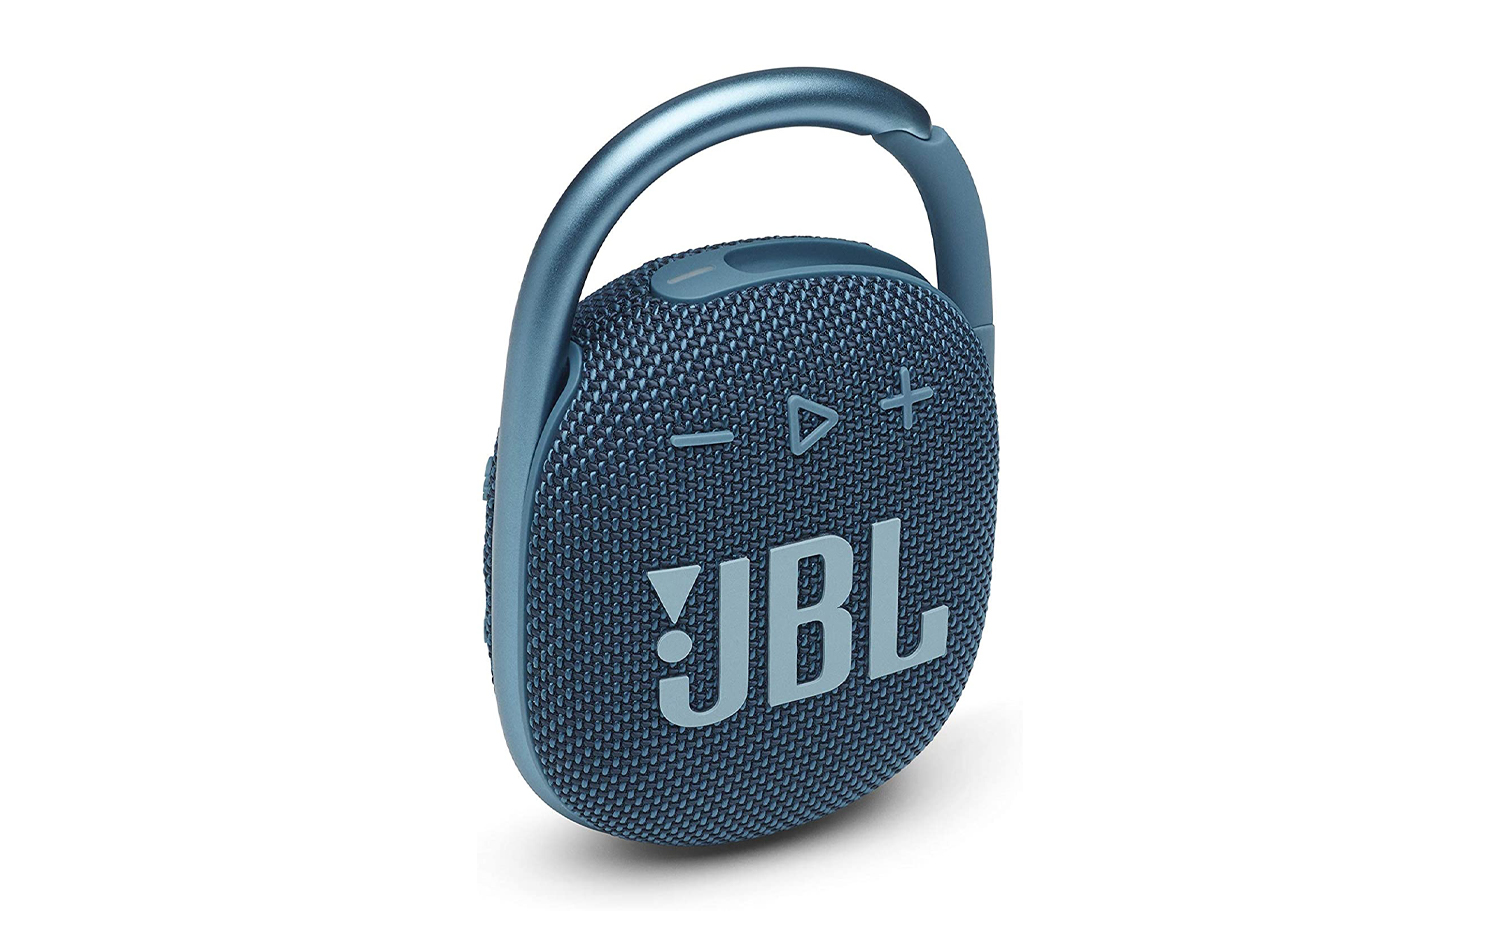 best back to school accessories for MacBook: JBL Clip 4 against a white background